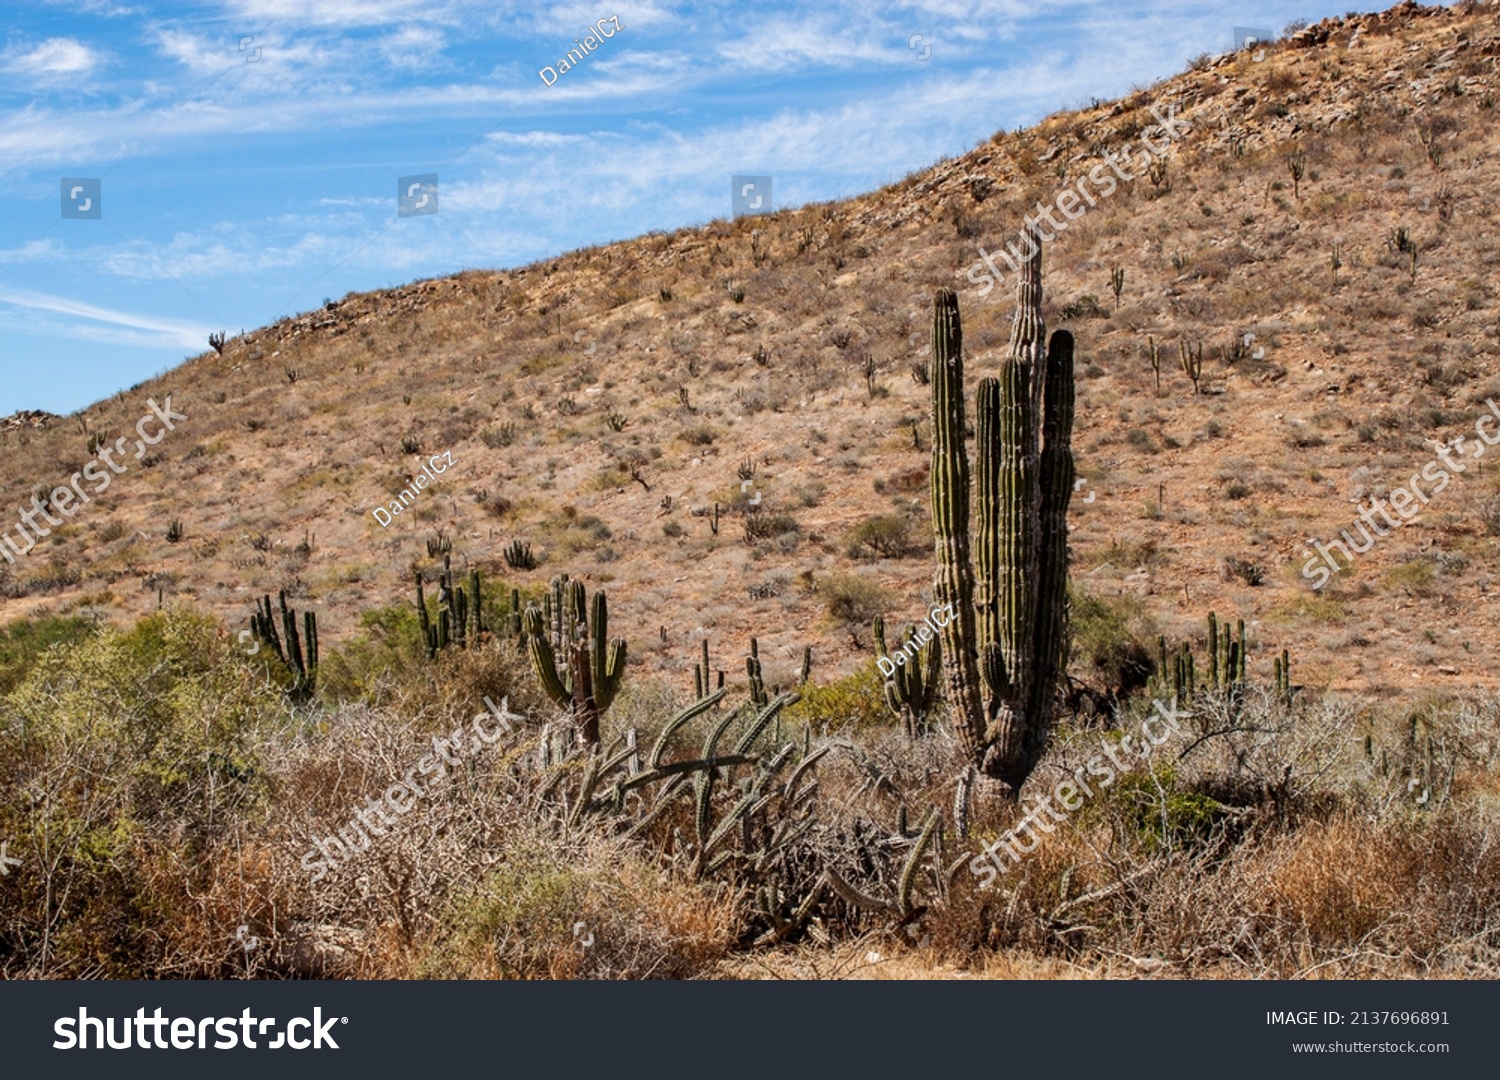 Mexican cactus field in the desert, part of a large nature reserve area in the town of Todos Santos, in Baja California Sur, Mexico. #2137696891